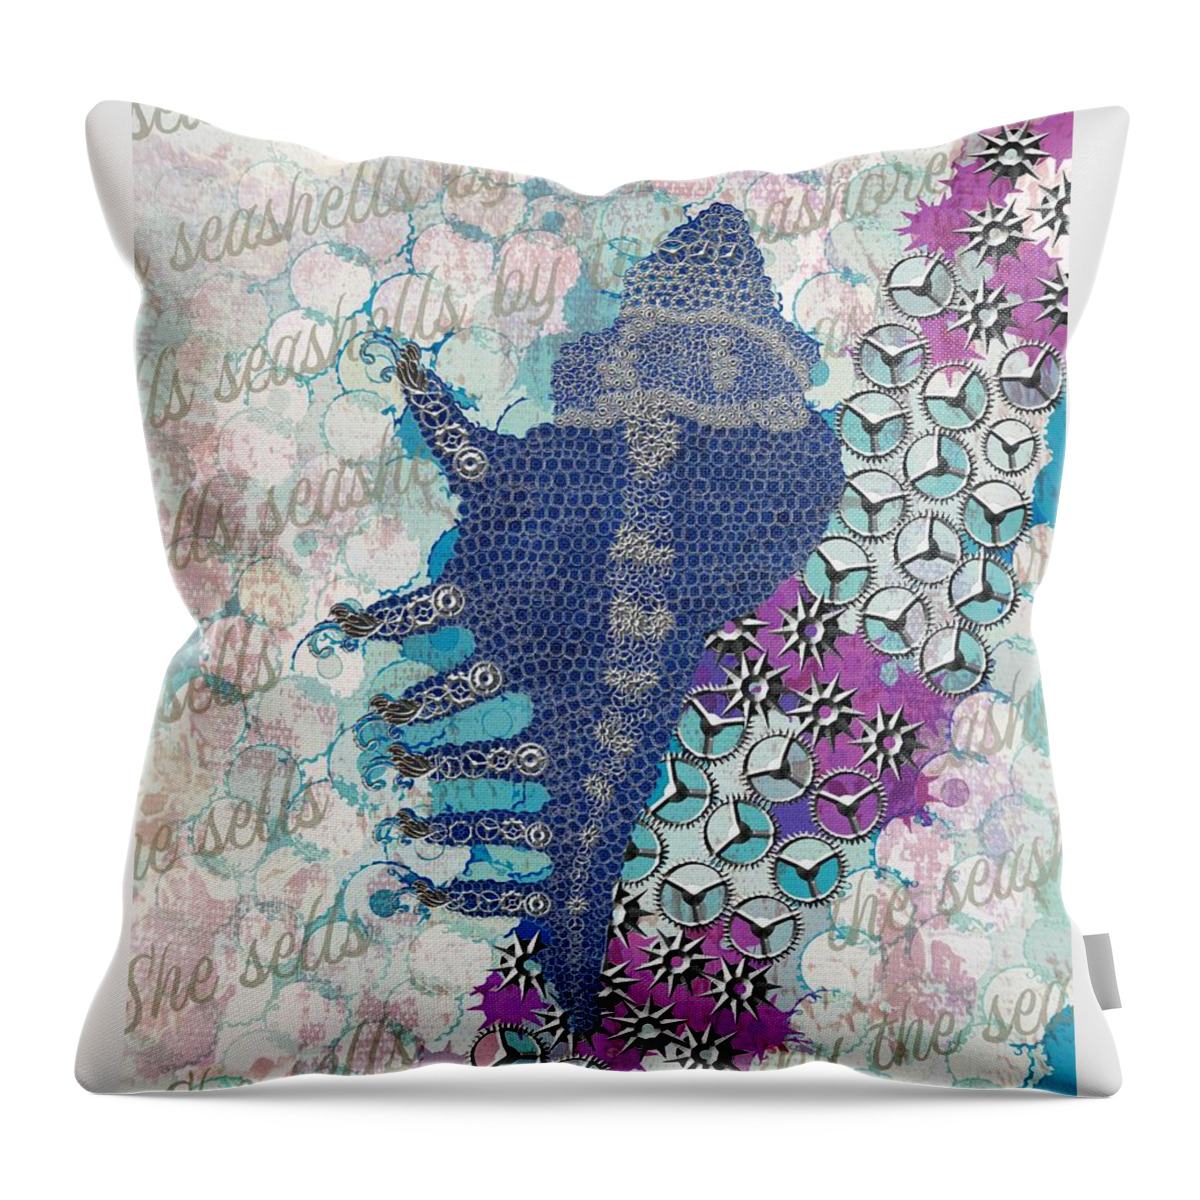 Seashell Throw Pillow featuring the digital art Silver Metal Lace Murex Seashell by Joan Stratton